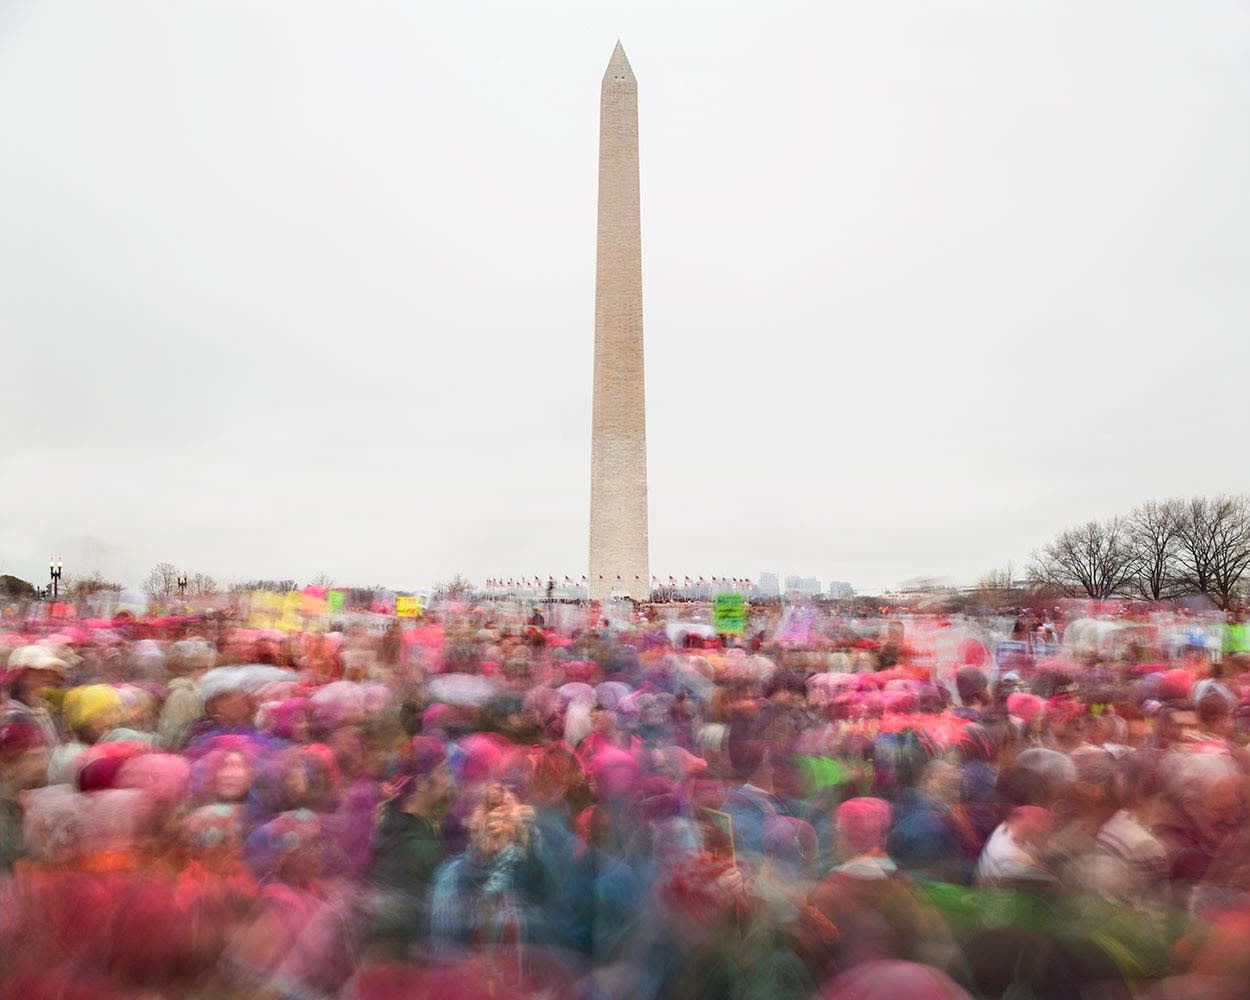 Women's March on January 21st, 2017 in front of Washington Monument in Washington, D.C. by Matthew Pillsbury 